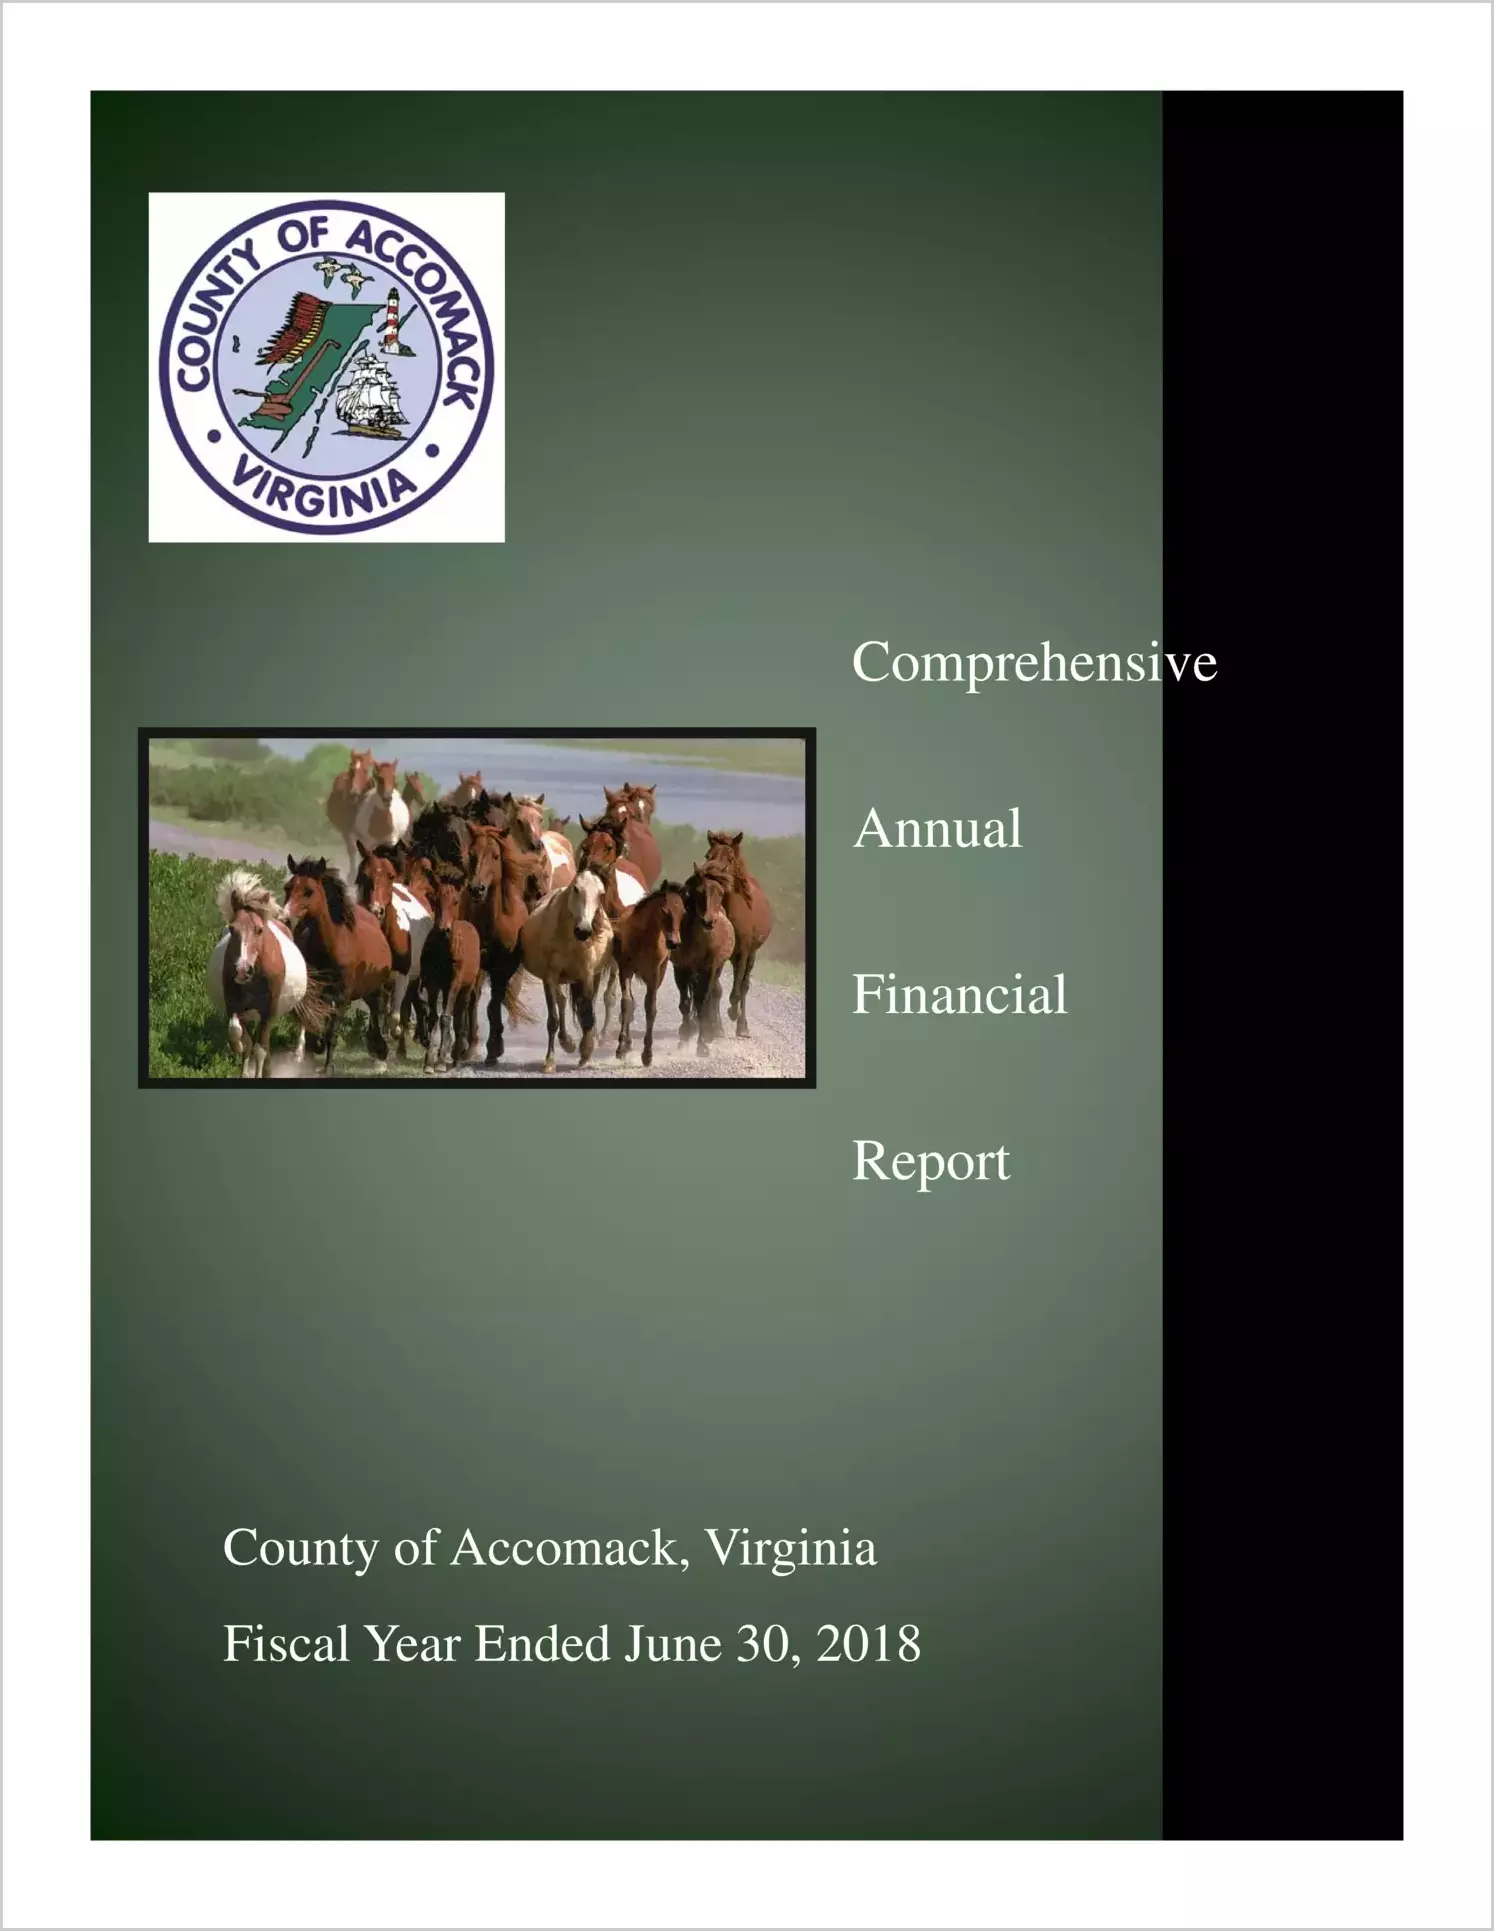 2018 Annual Financial Report for County of Accomack